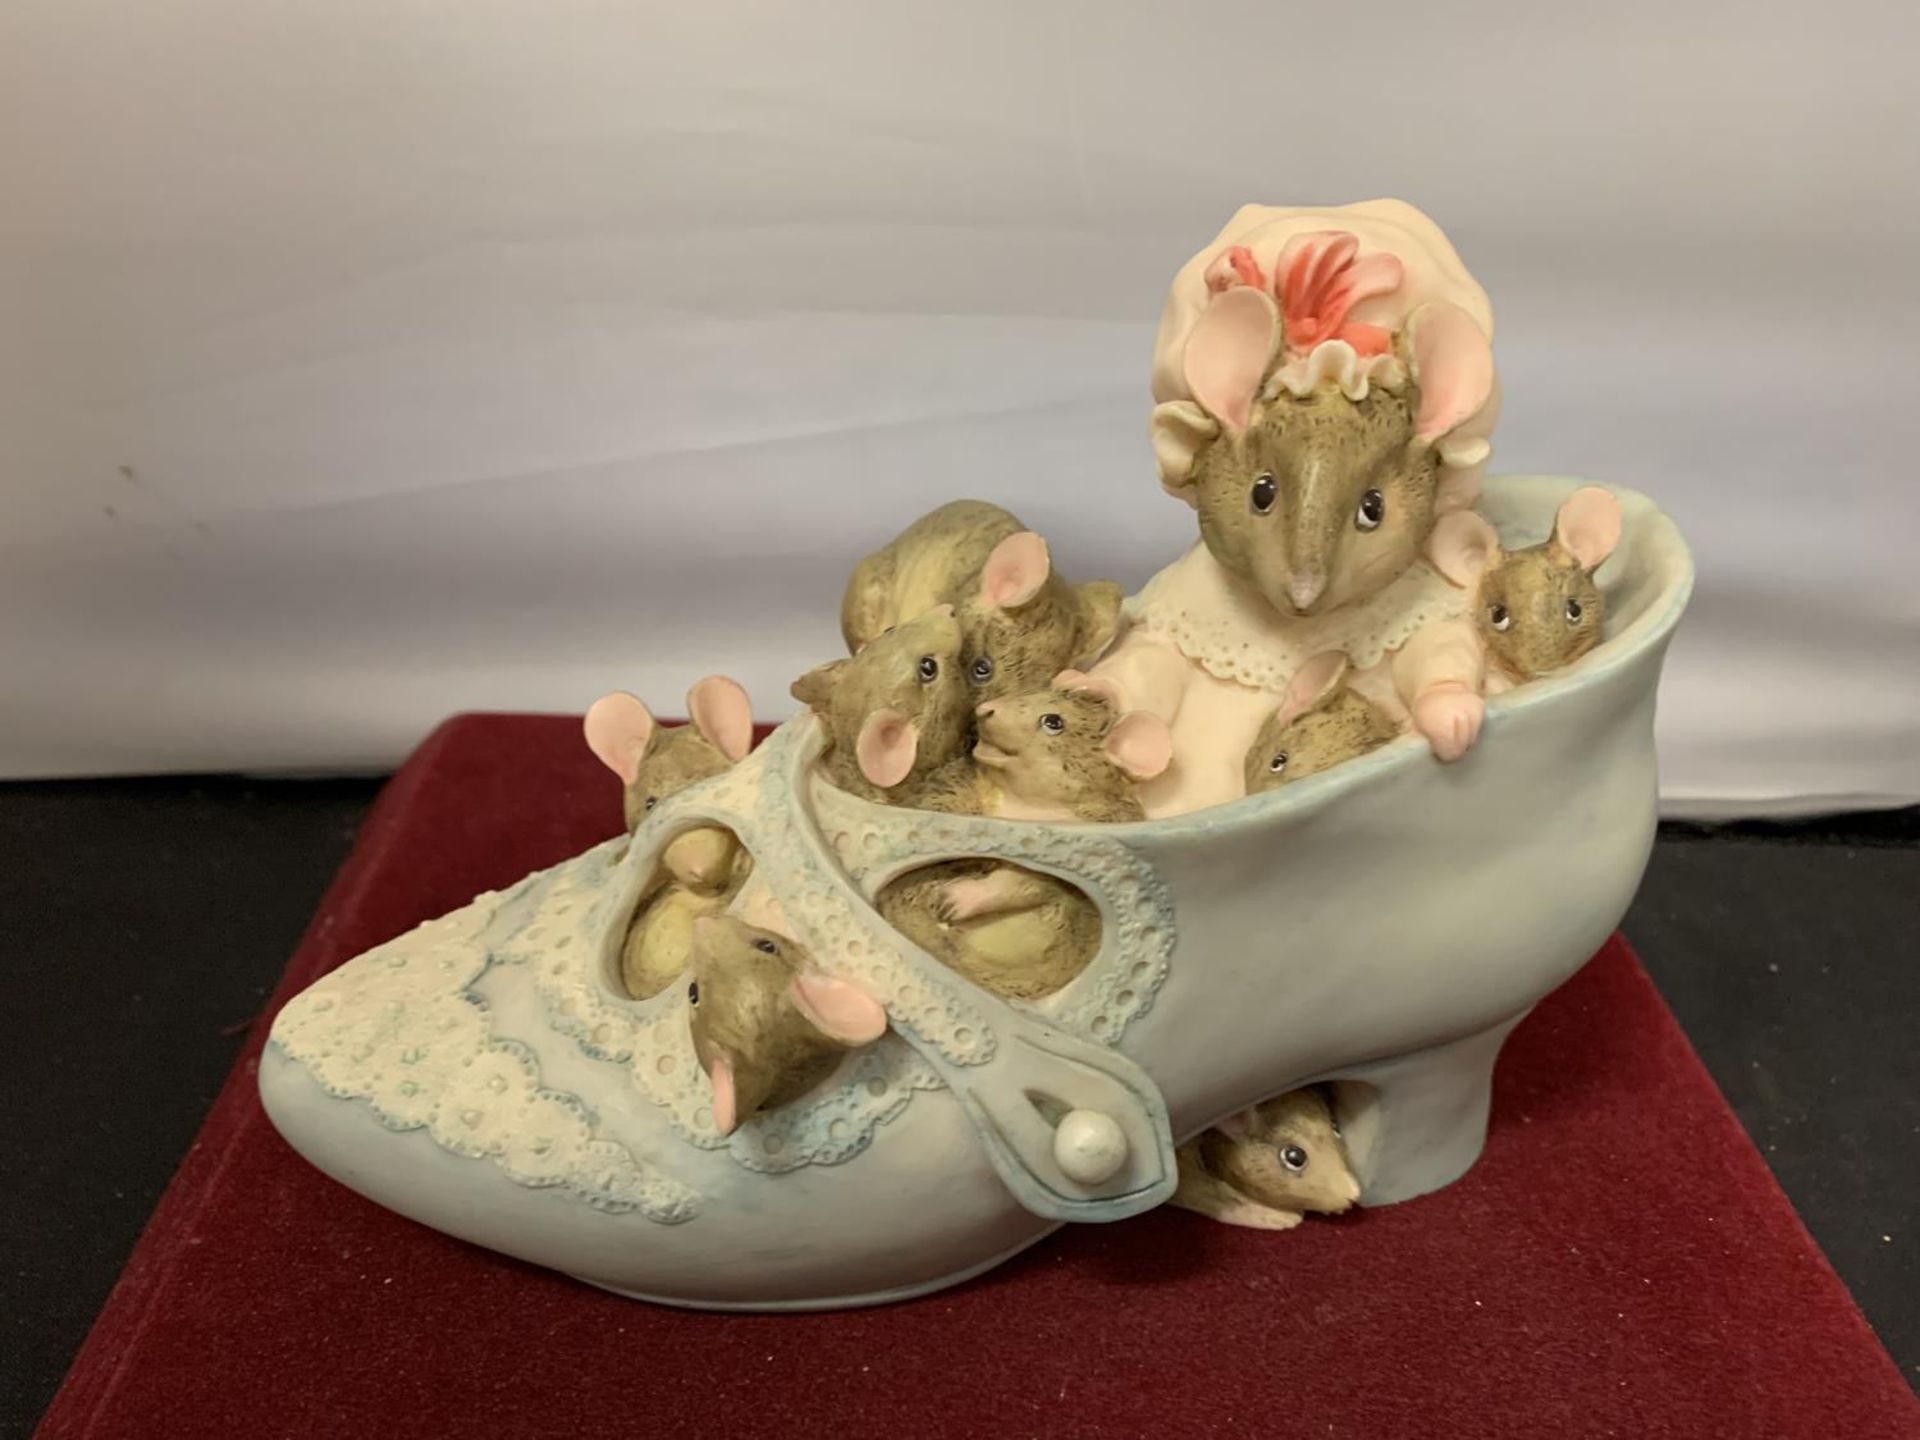 A BORDER FINE ARTS MONEY BOX MOUSE THEMED THERE WAS AN OLD WOMAN WHO LIVED IN A SHOE